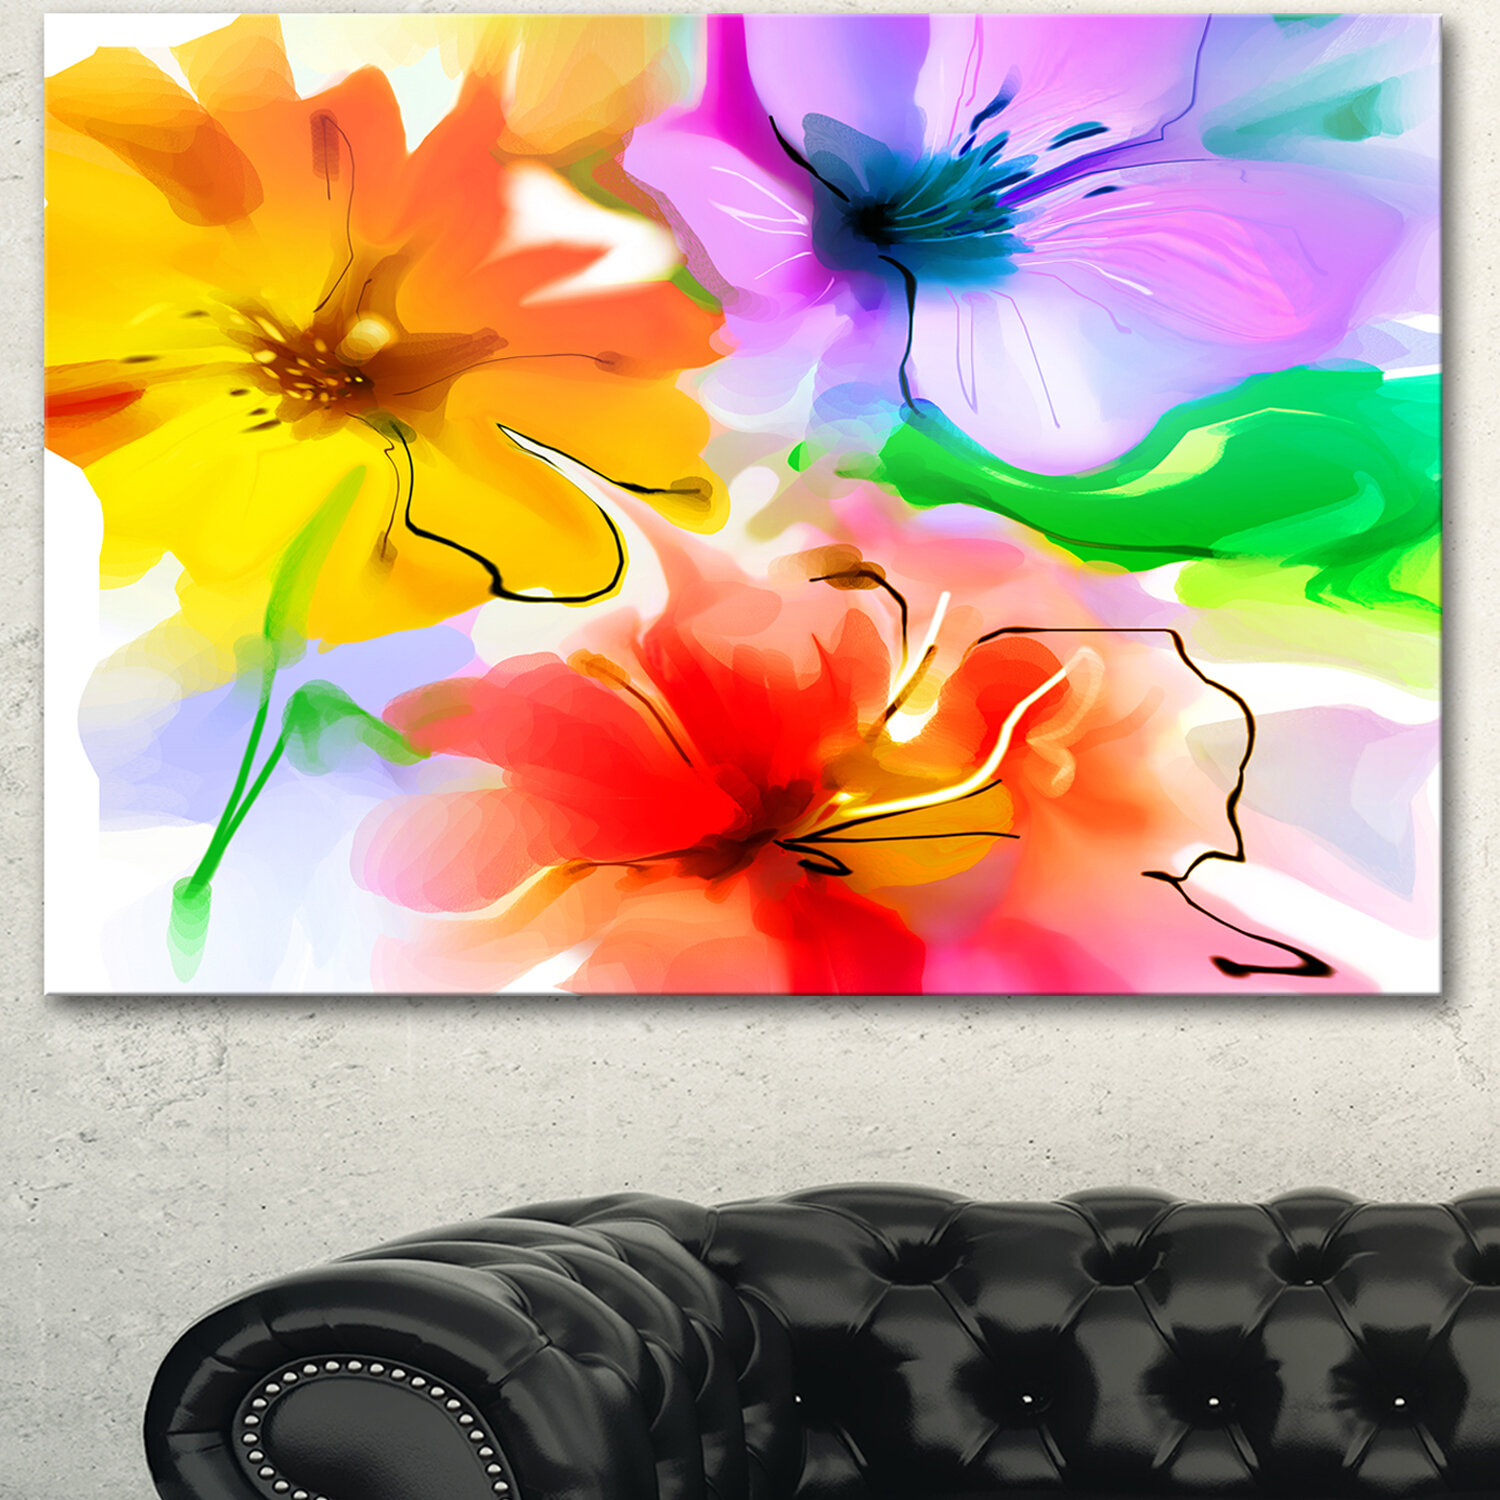 DesignArt 'Bunch of Colourful Flowers Sketch' Painting Print on